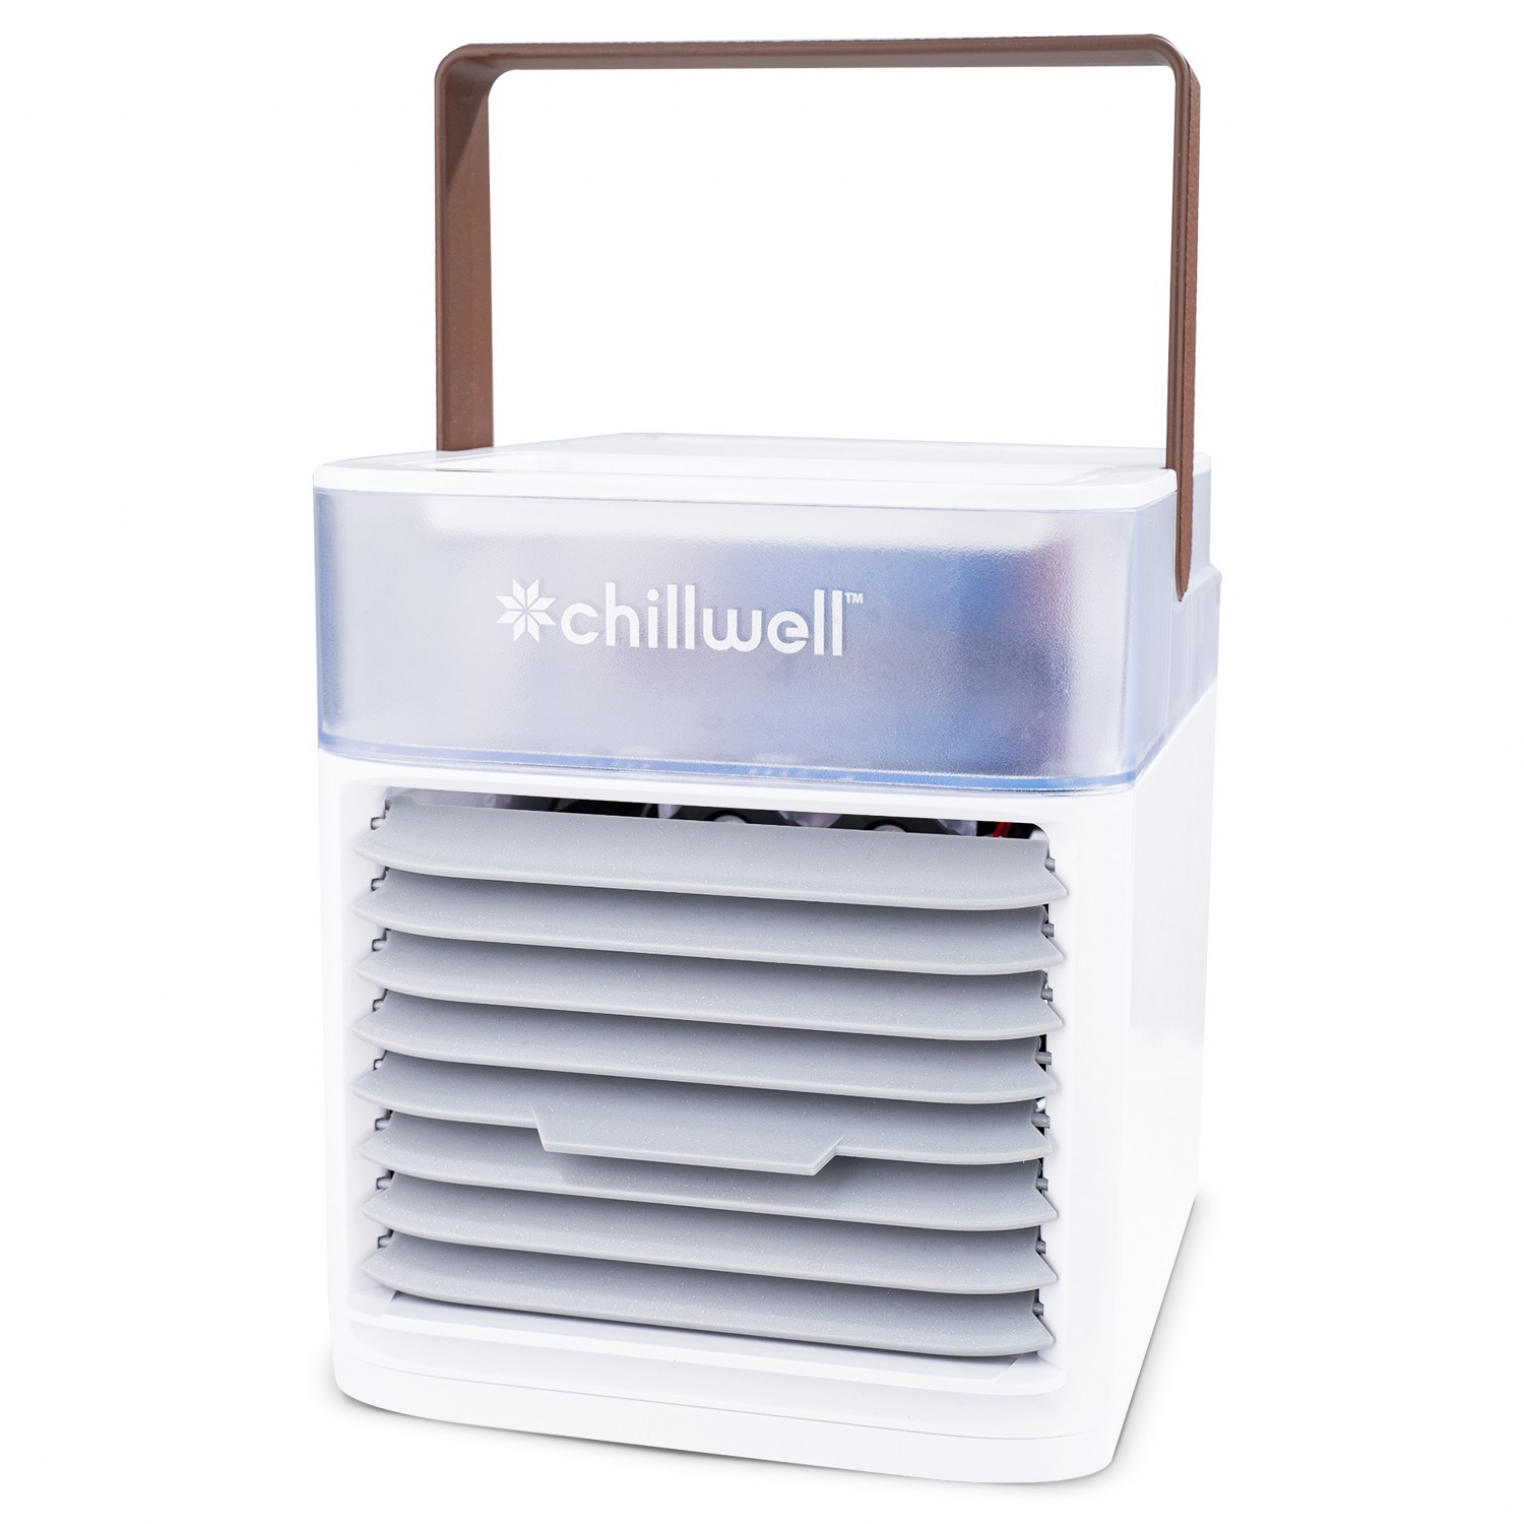 Chillwell AC Evaporative Air Cooler Tower